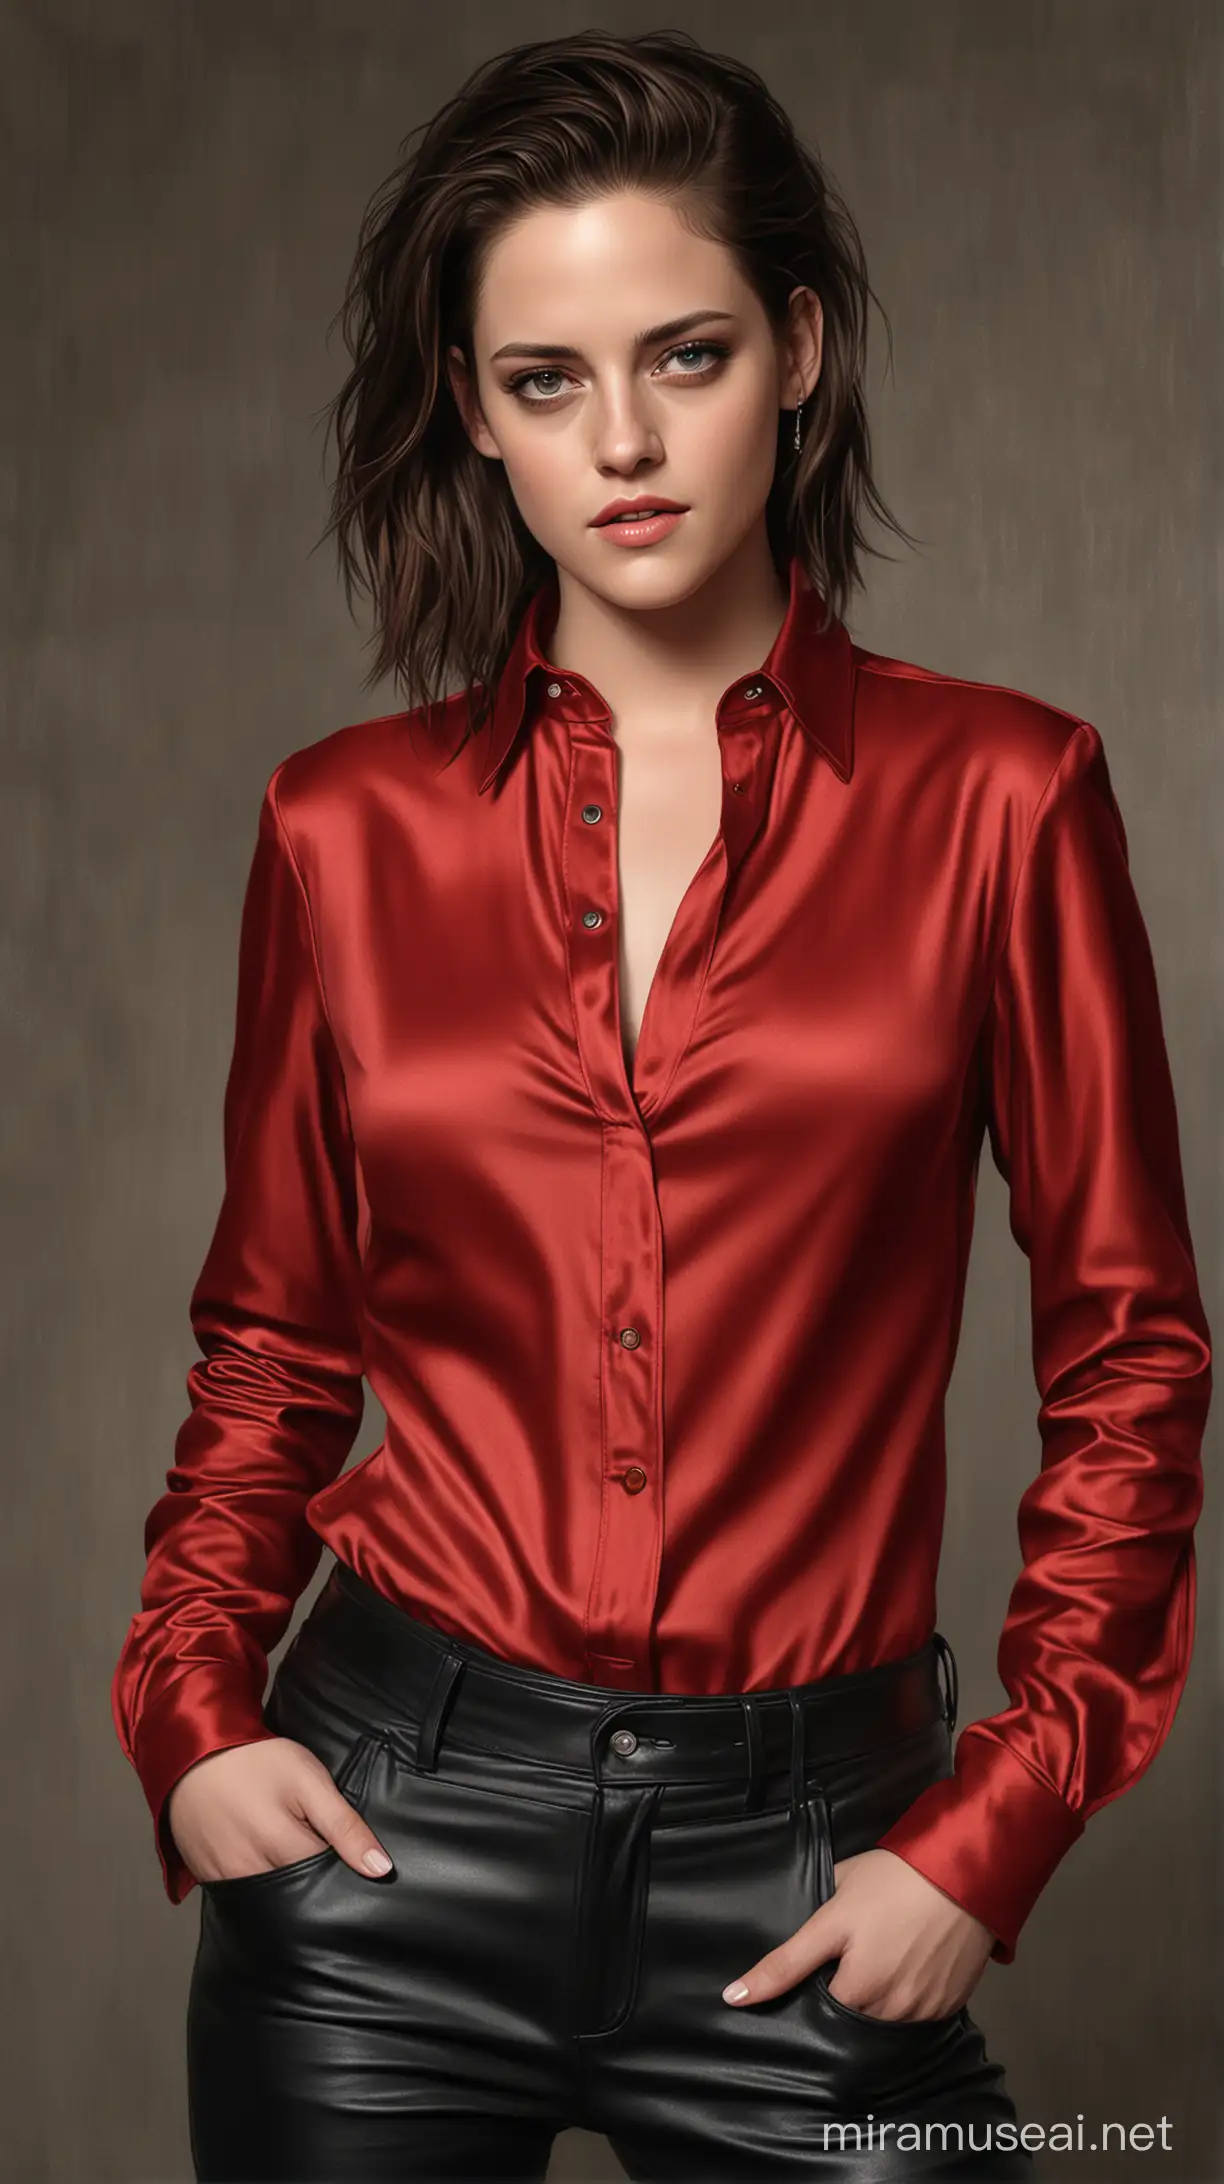 Detailed digital painting of Kristen Stewart, in a long sleeve red satin blouse, black leather pants, high fashion portrayal, realistic textures, detailed facial features, professional digital art, high quality, realistic, detailed clothing, satin fabric, leather texture, professional lighting, realistic portrait, celebrity, glamorous, highres, professional rendering, detailed hair, elegant pose
